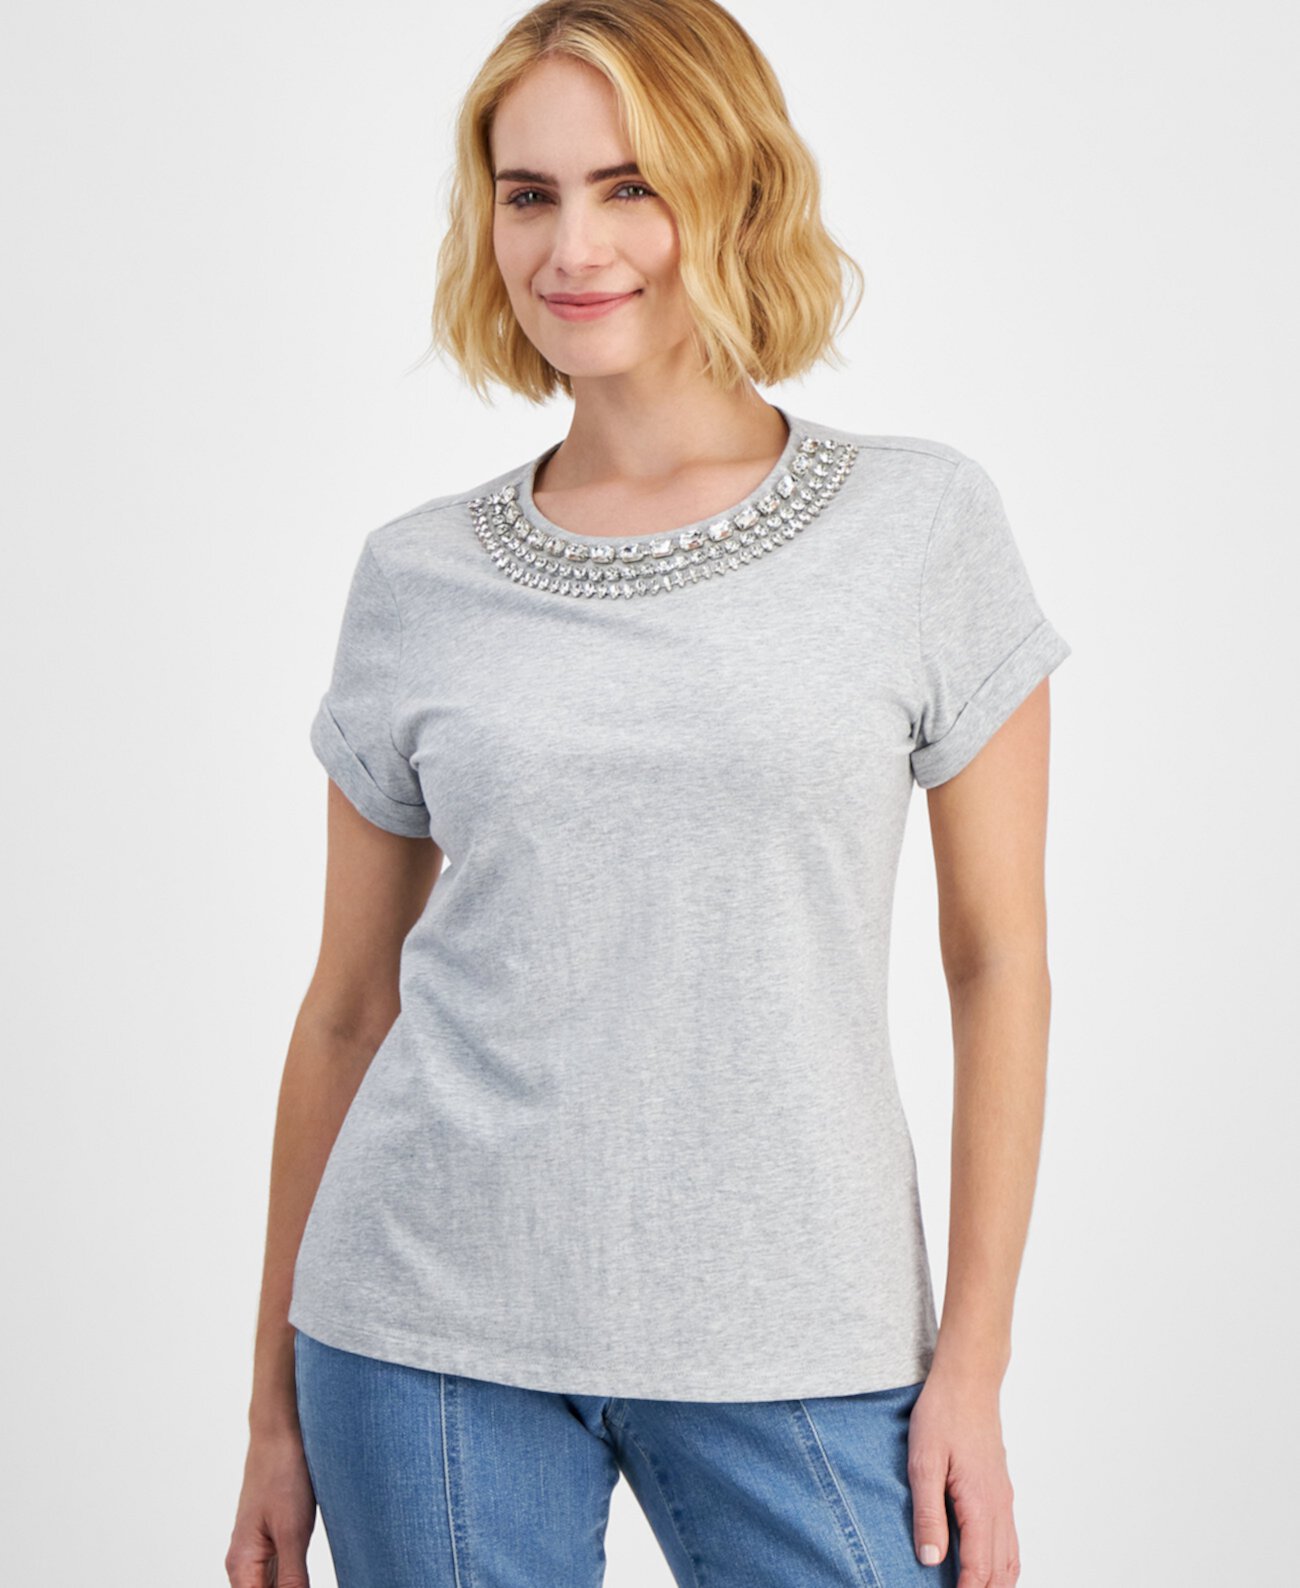 Petite Cotton Rhinestone-Neck Top, Created for Macy's I.N.C. International Concepts